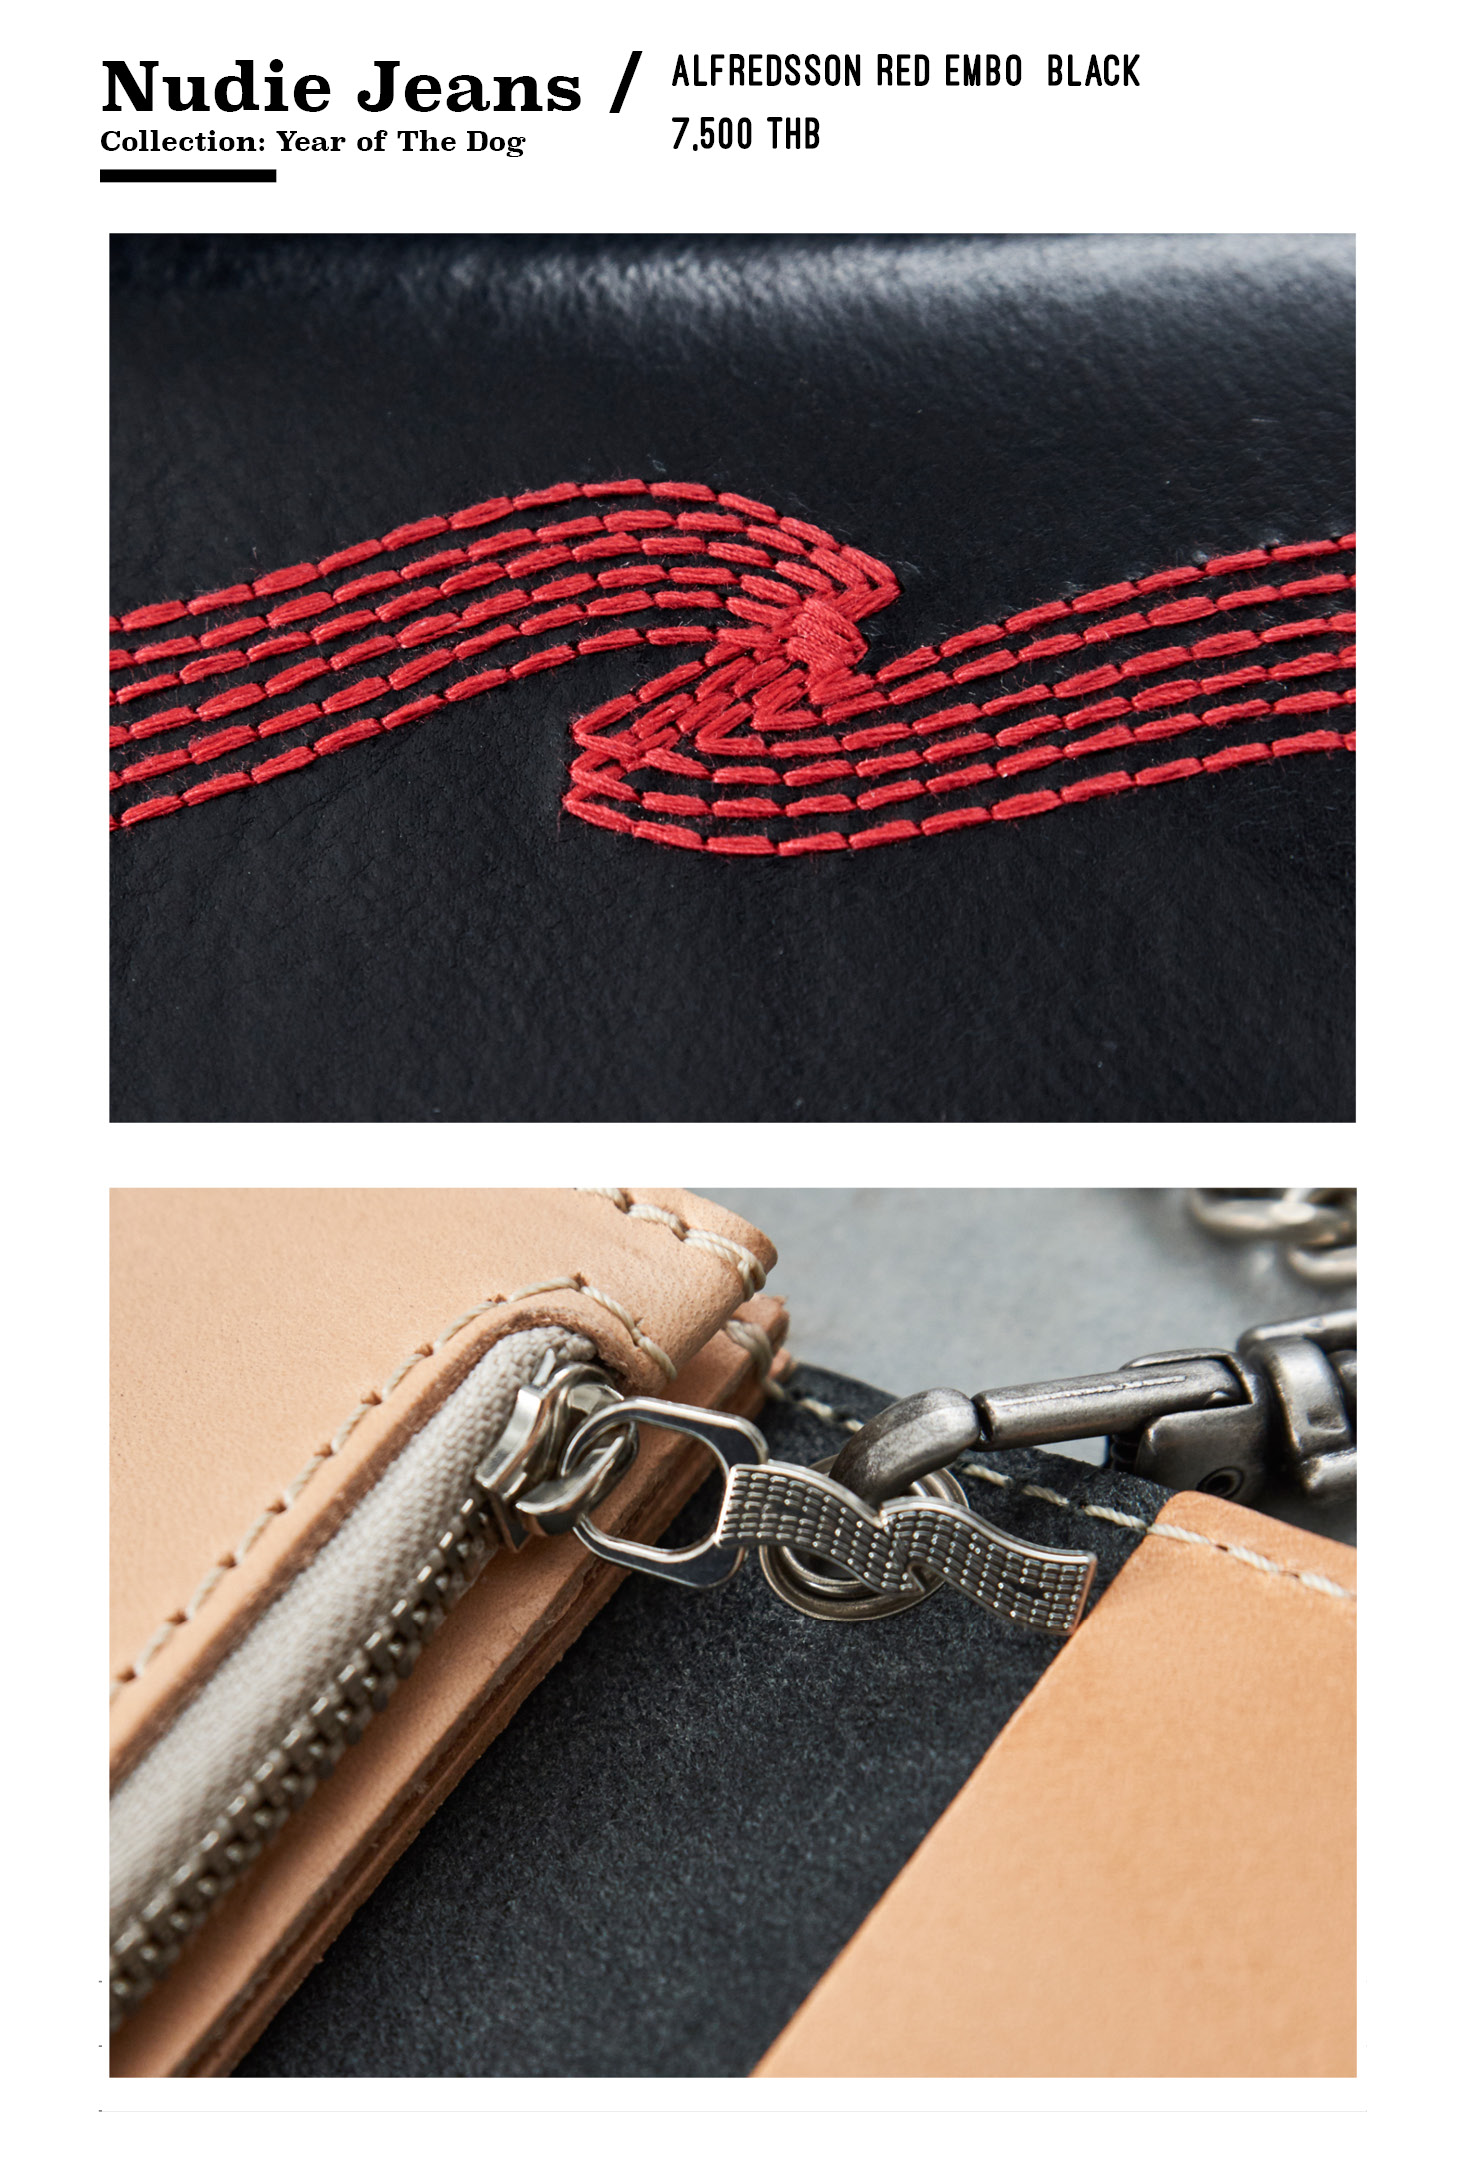 NEW ARRIVAL : NUDIE JEANS Collection: Year of The Dog